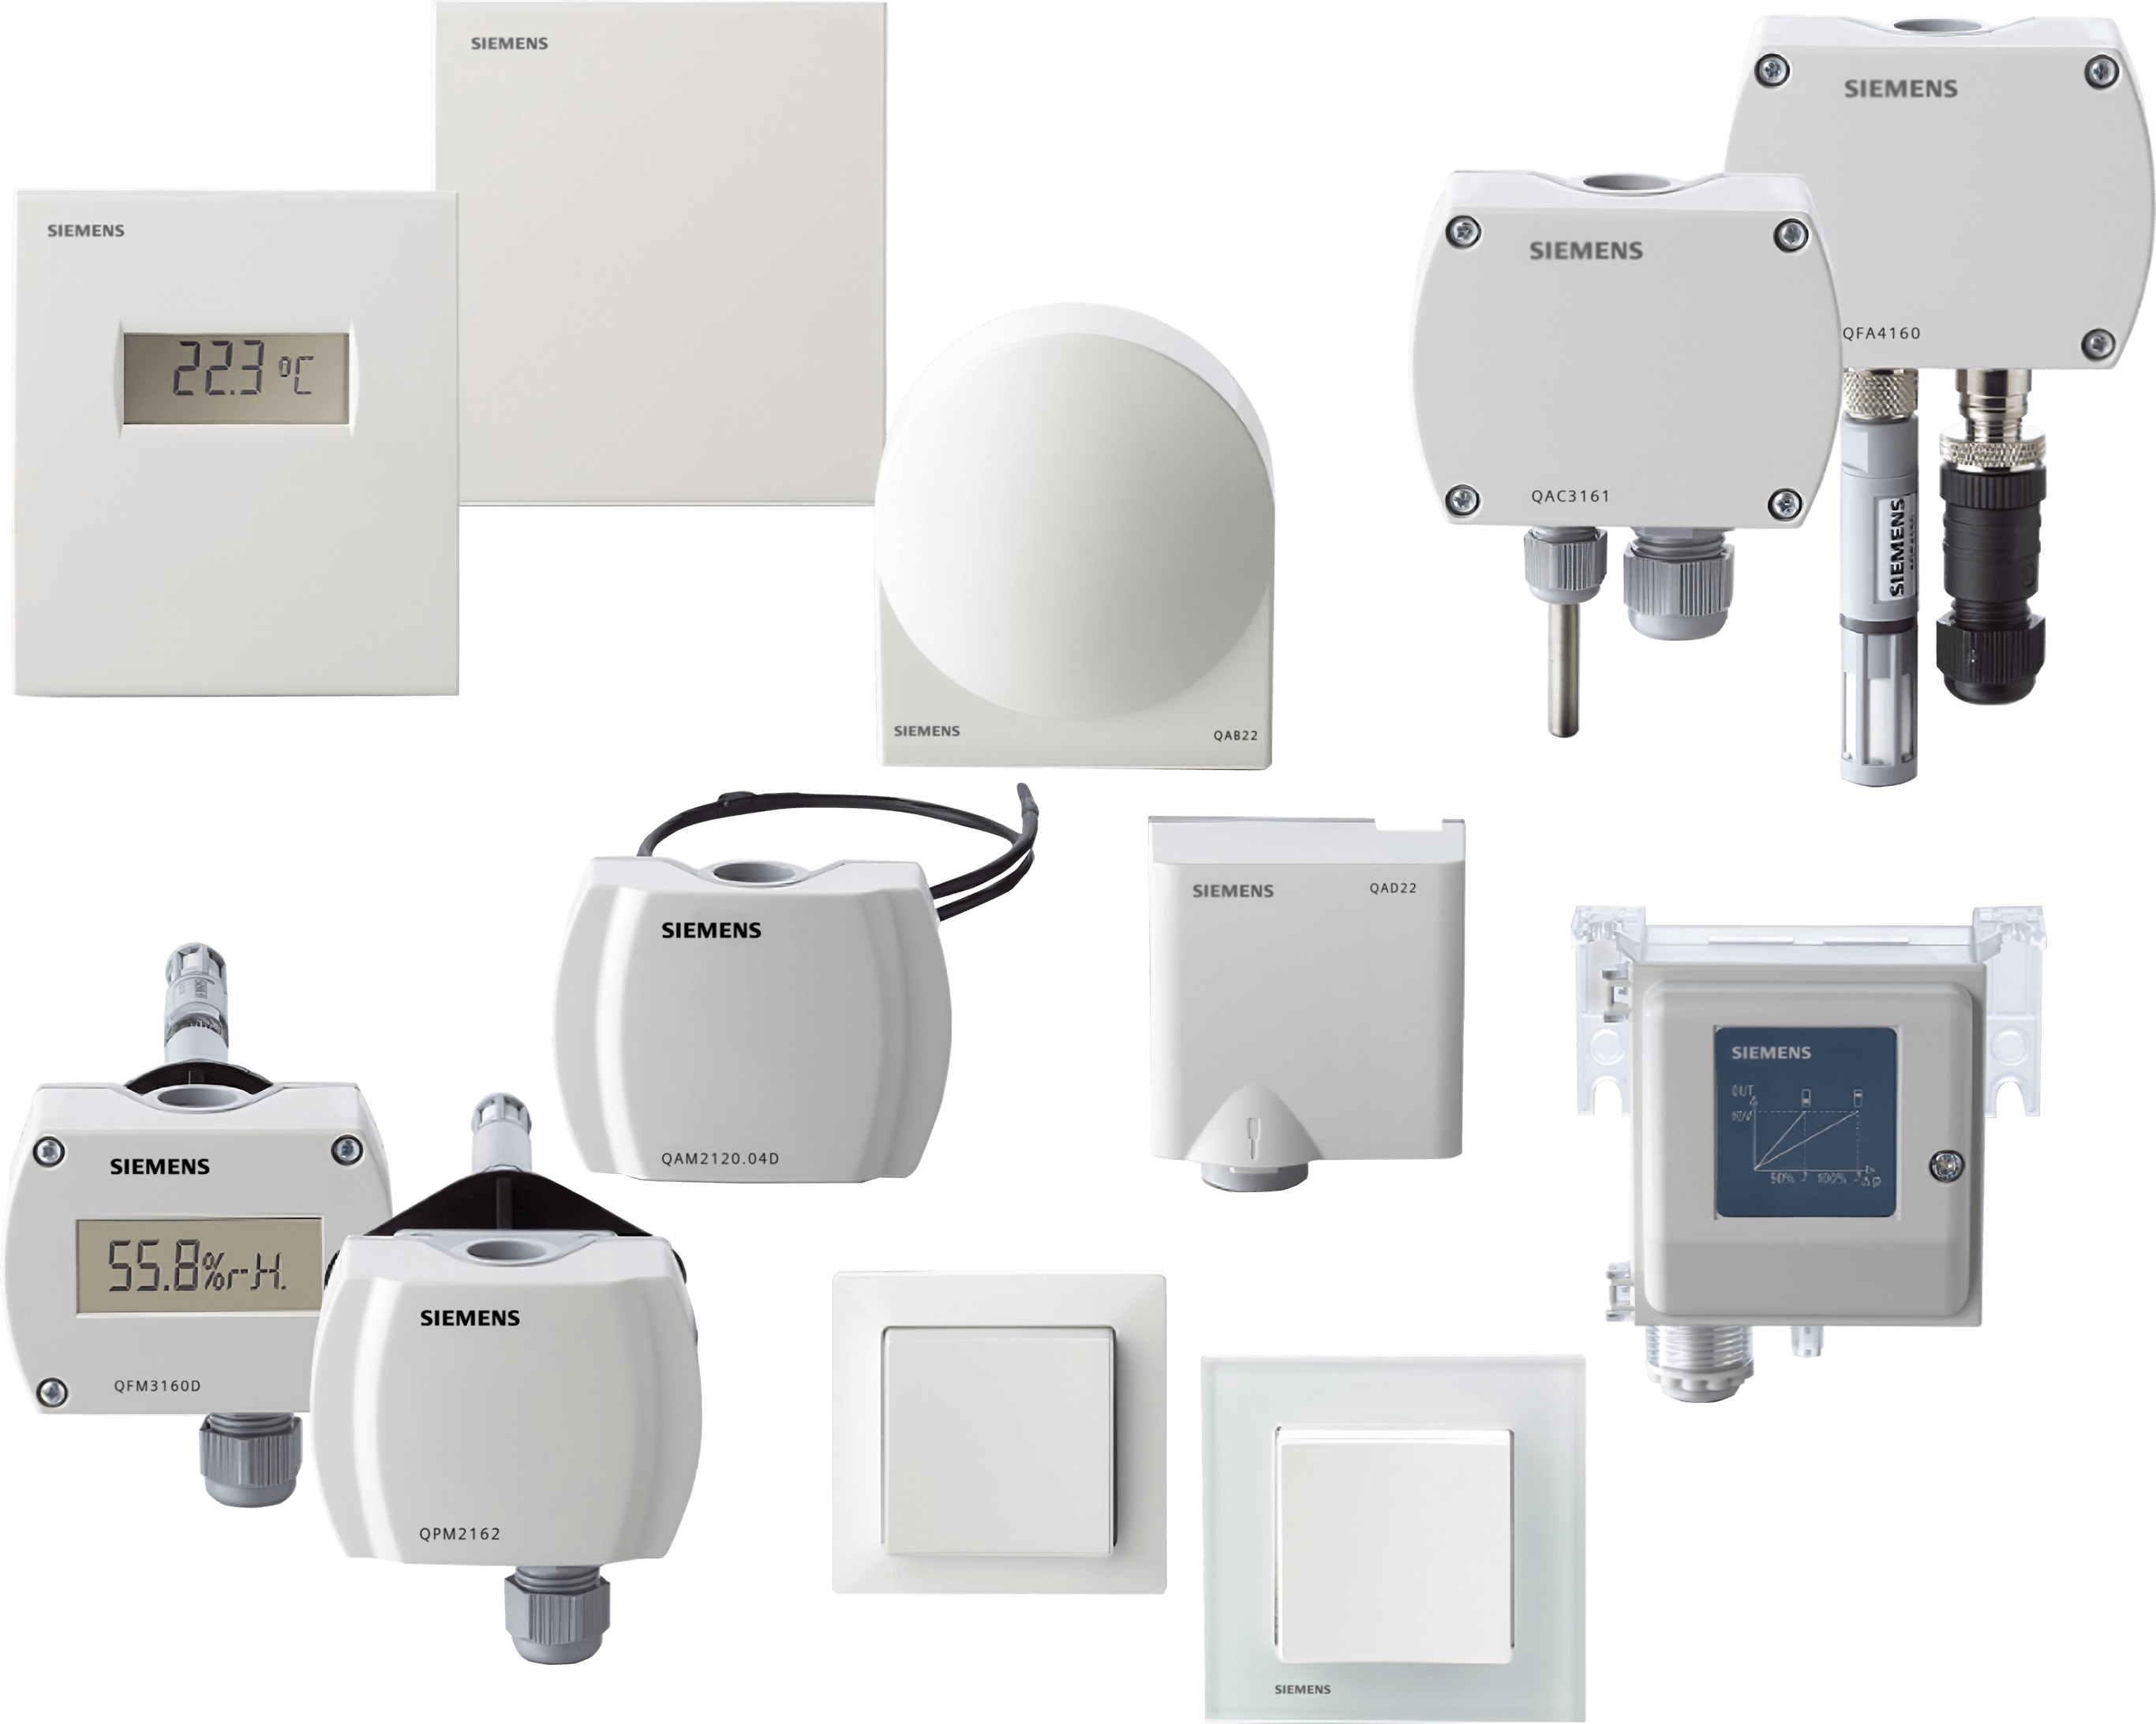 Sensors and protection devices for HVAC/R units